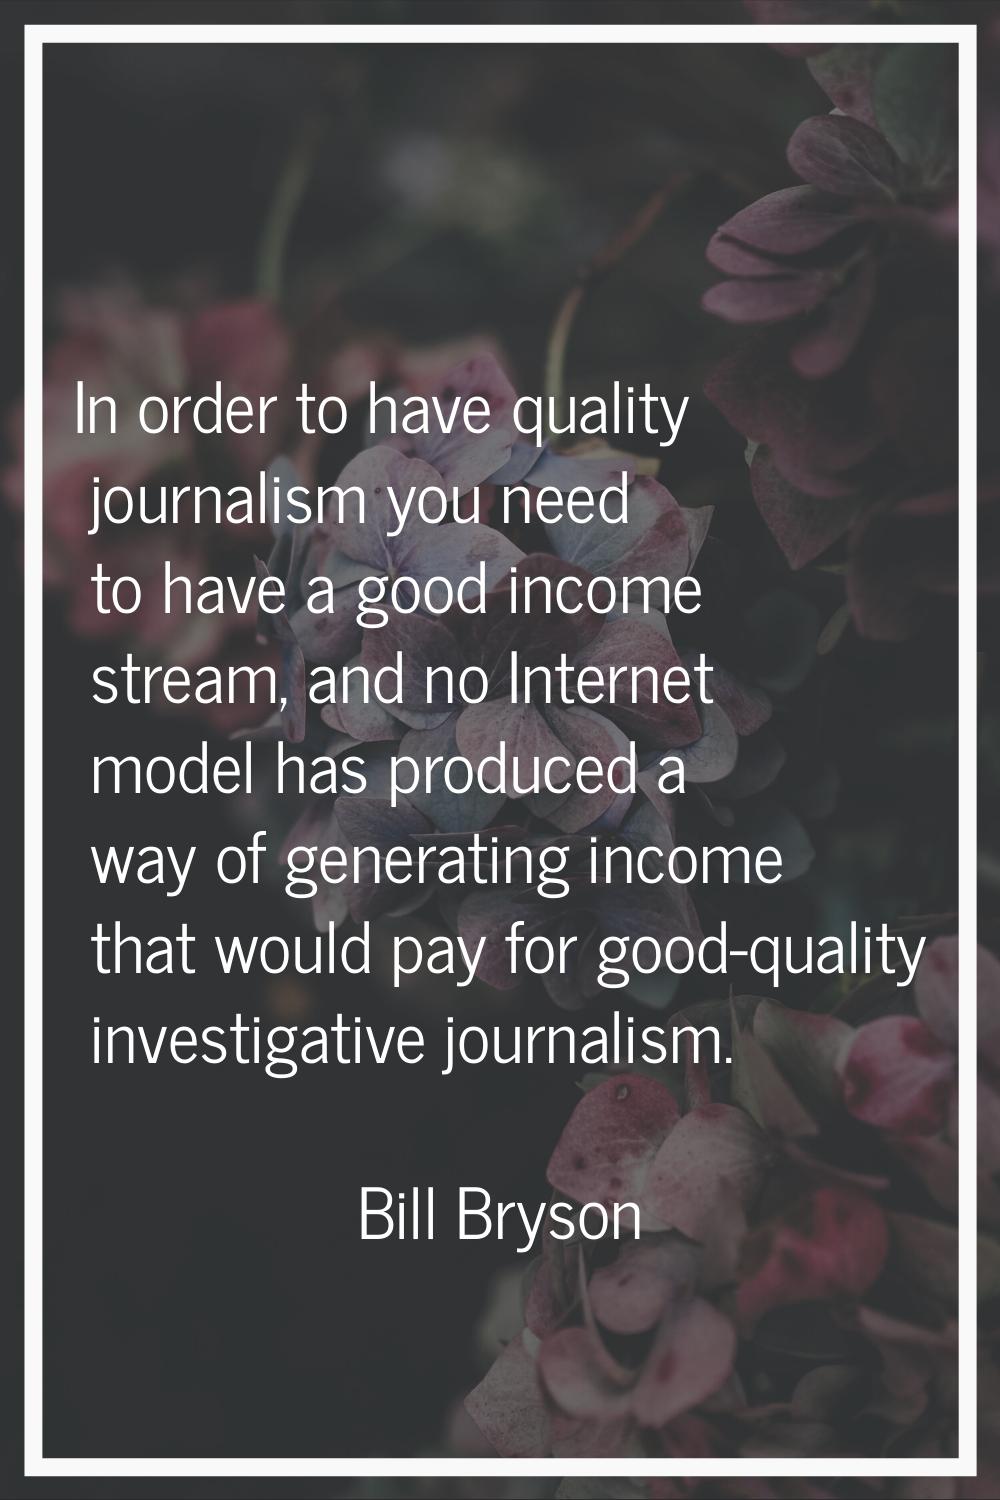 In order to have quality journalism you need to have a good income stream, and no Internet model ha